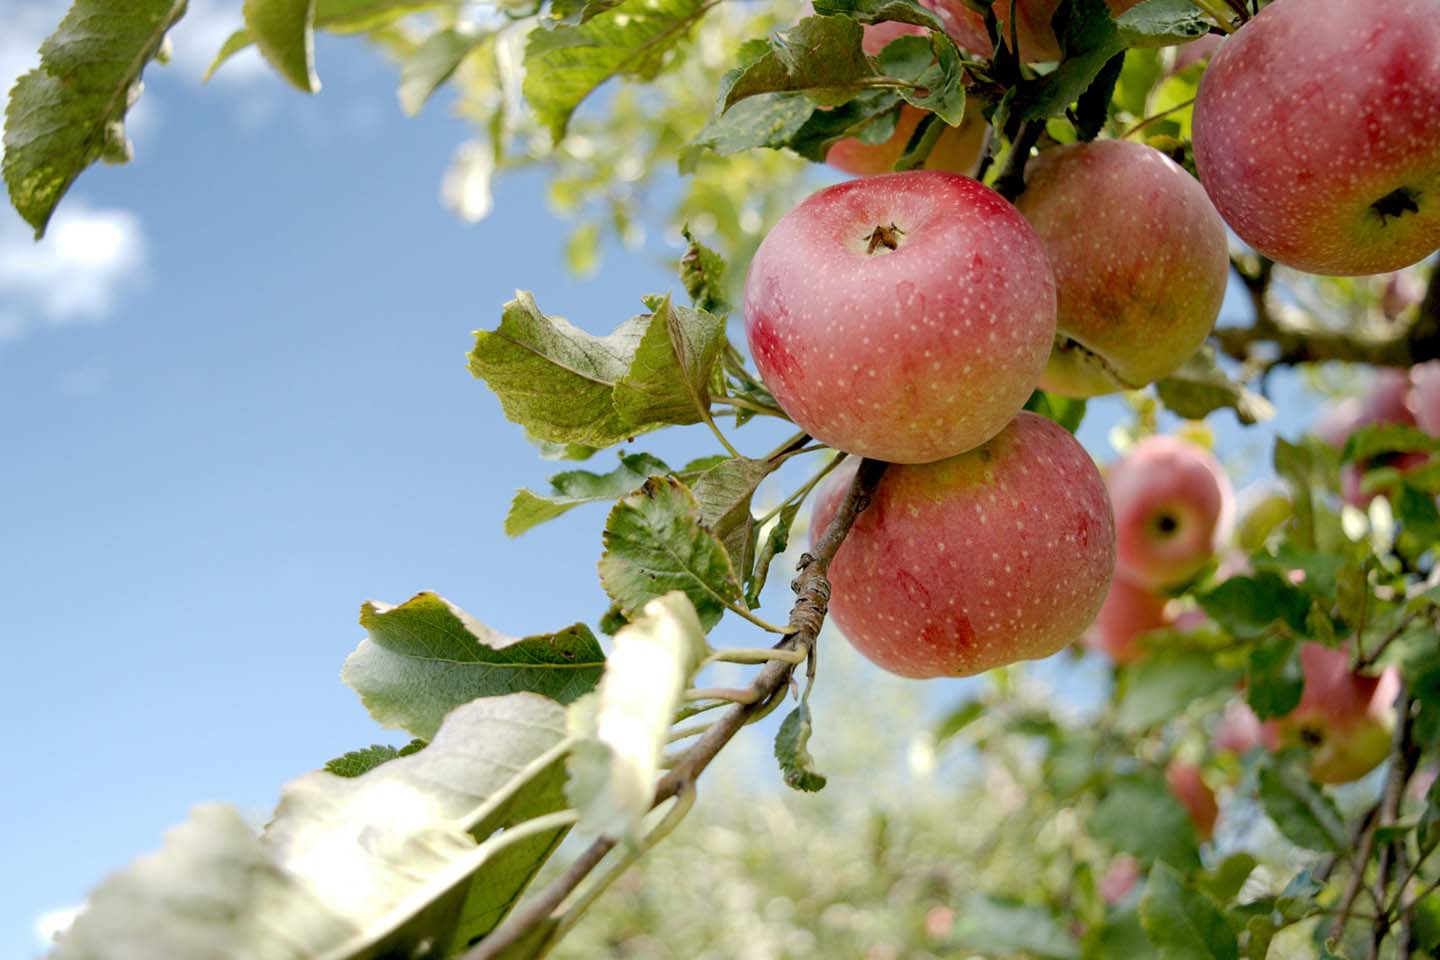 a close up photo of an apple tree branch with its fruits hanging